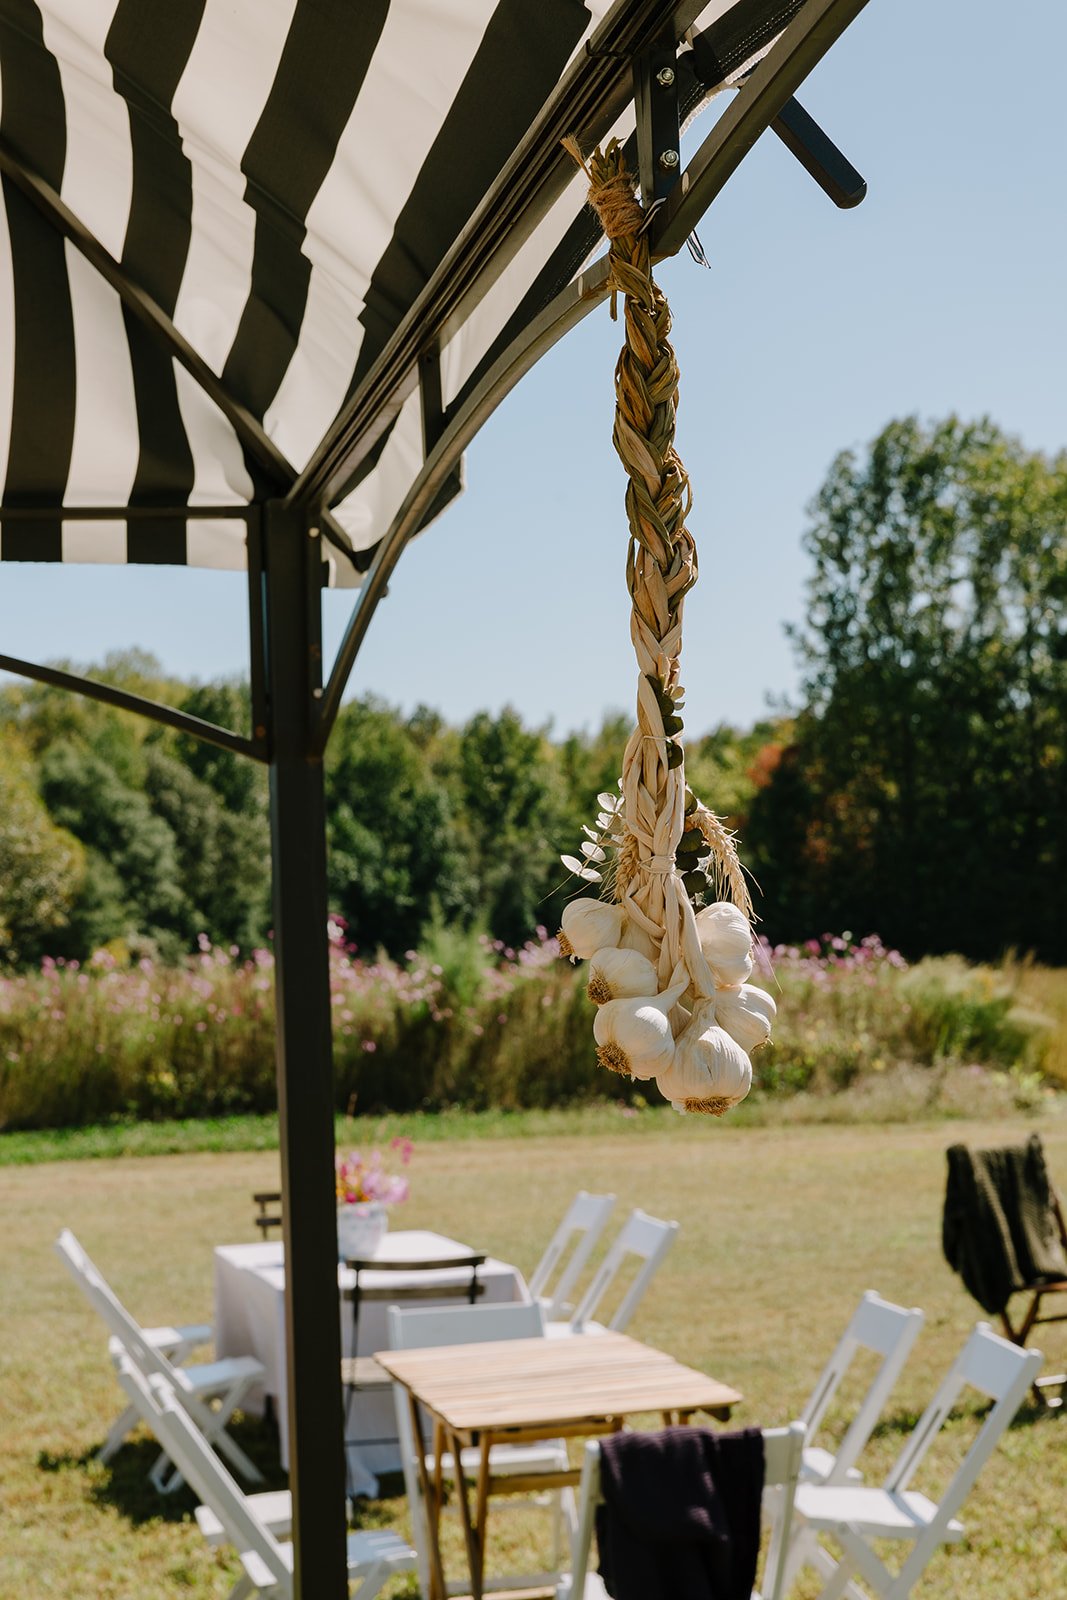 An Intimate Wedding in Tn at Mable & Jack Farmstead - Welcome Picnic - Destination Wedding Photographer (11).jpg